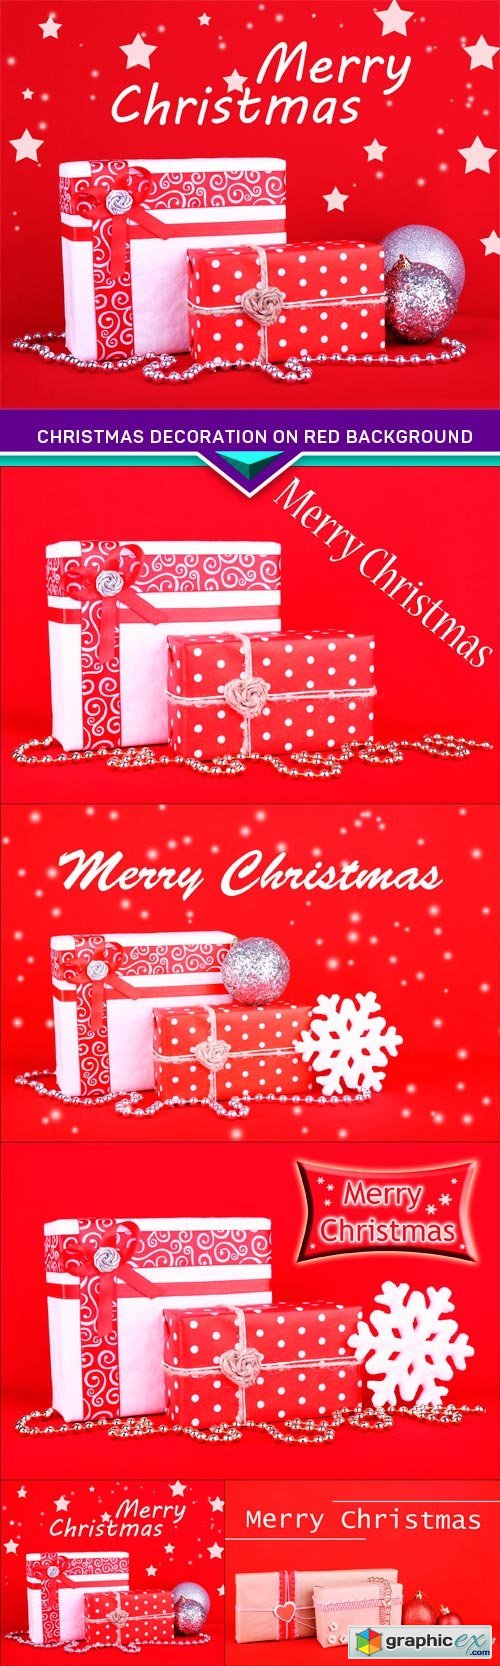 Beautiful bright gifts and Christmas decoration on red background 5X JPEG